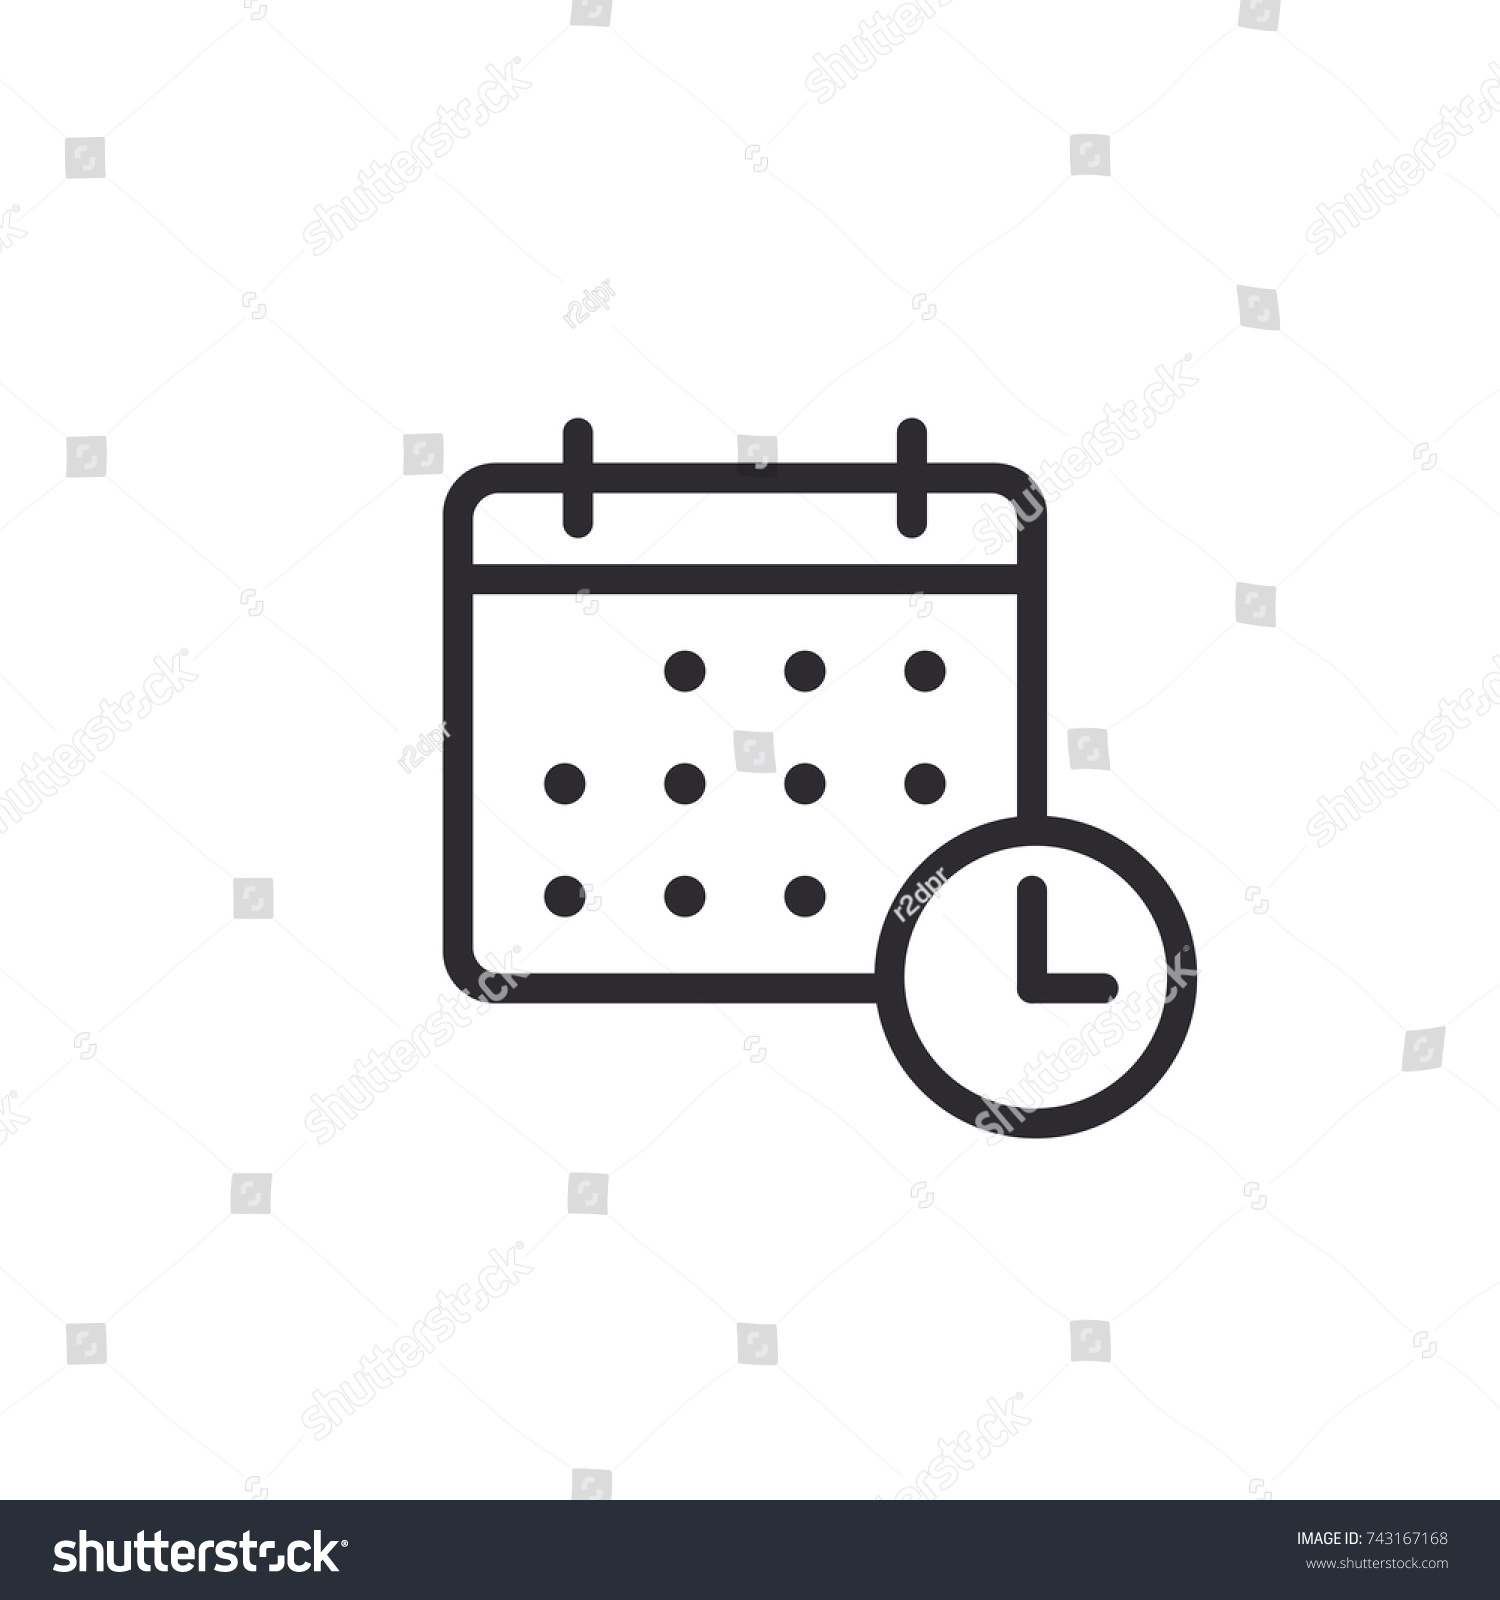 Calendar vector icon.  Calendar symbol. Time management. Calendar days. Holidays icon. Tear-off calendar. Working day. Weekend. Solemn date. Vacation sign. Clock sign. Task Manager. Deadline icon. #743167168